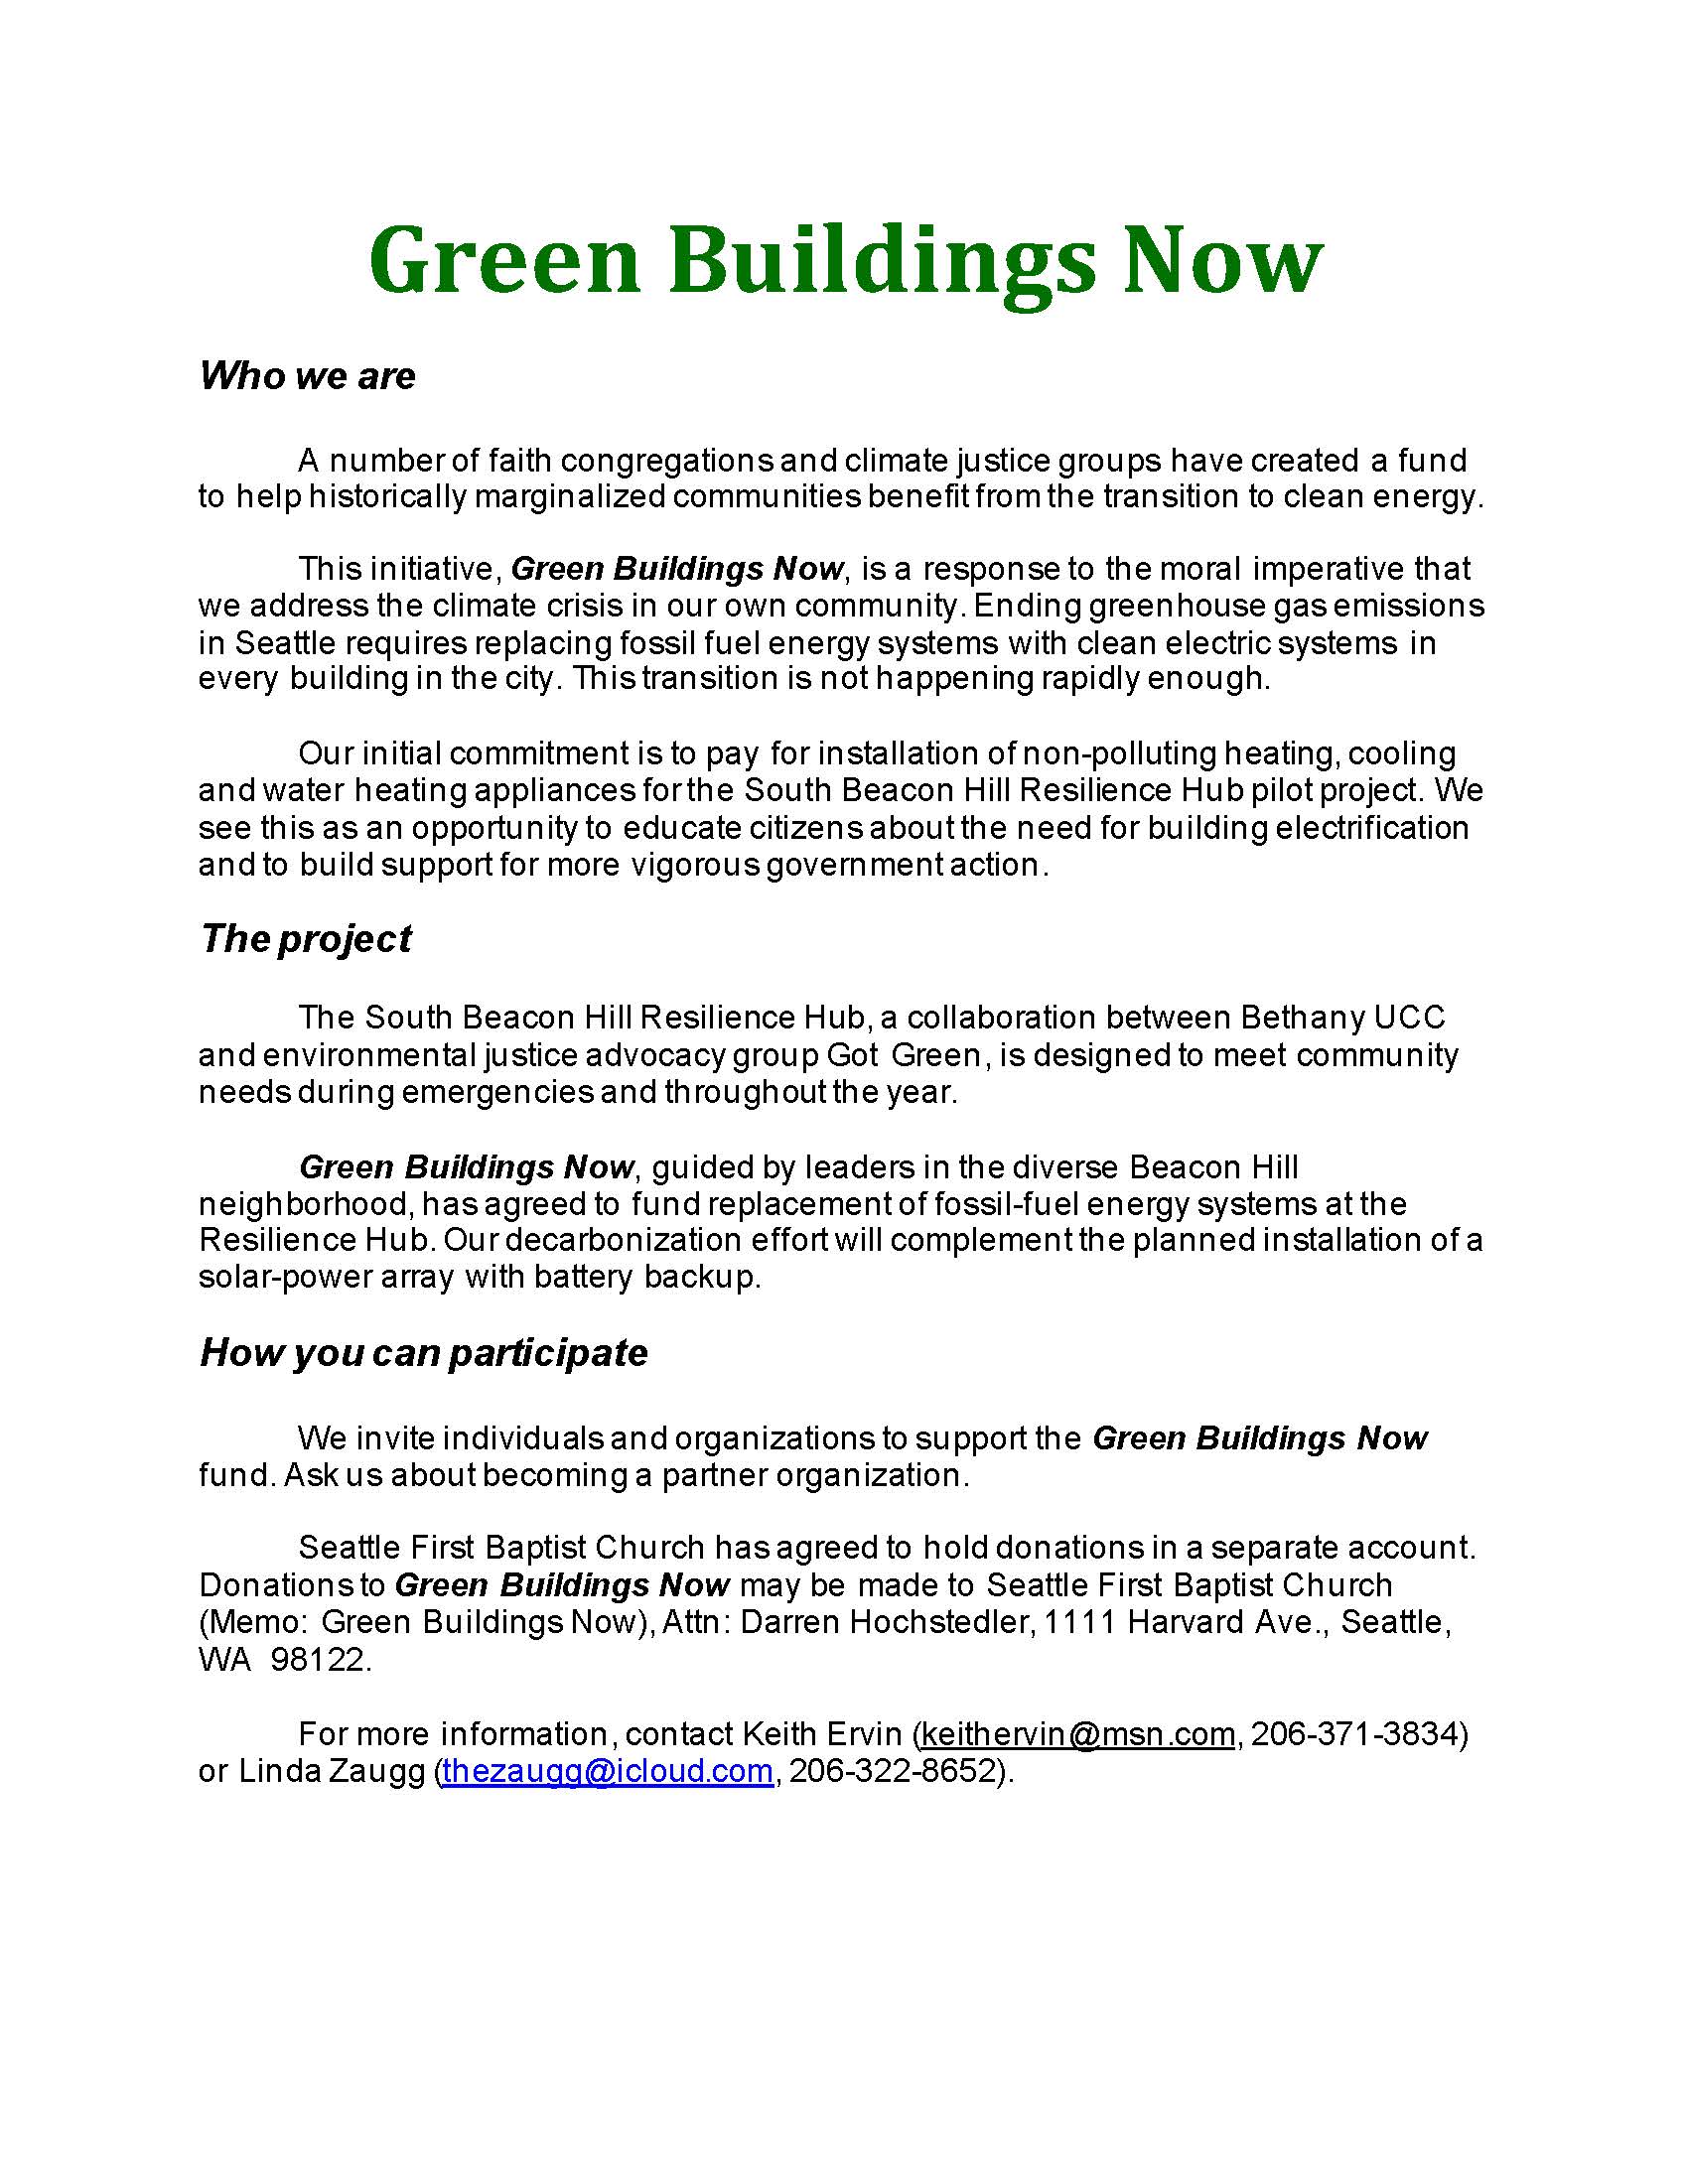 Green Building Now